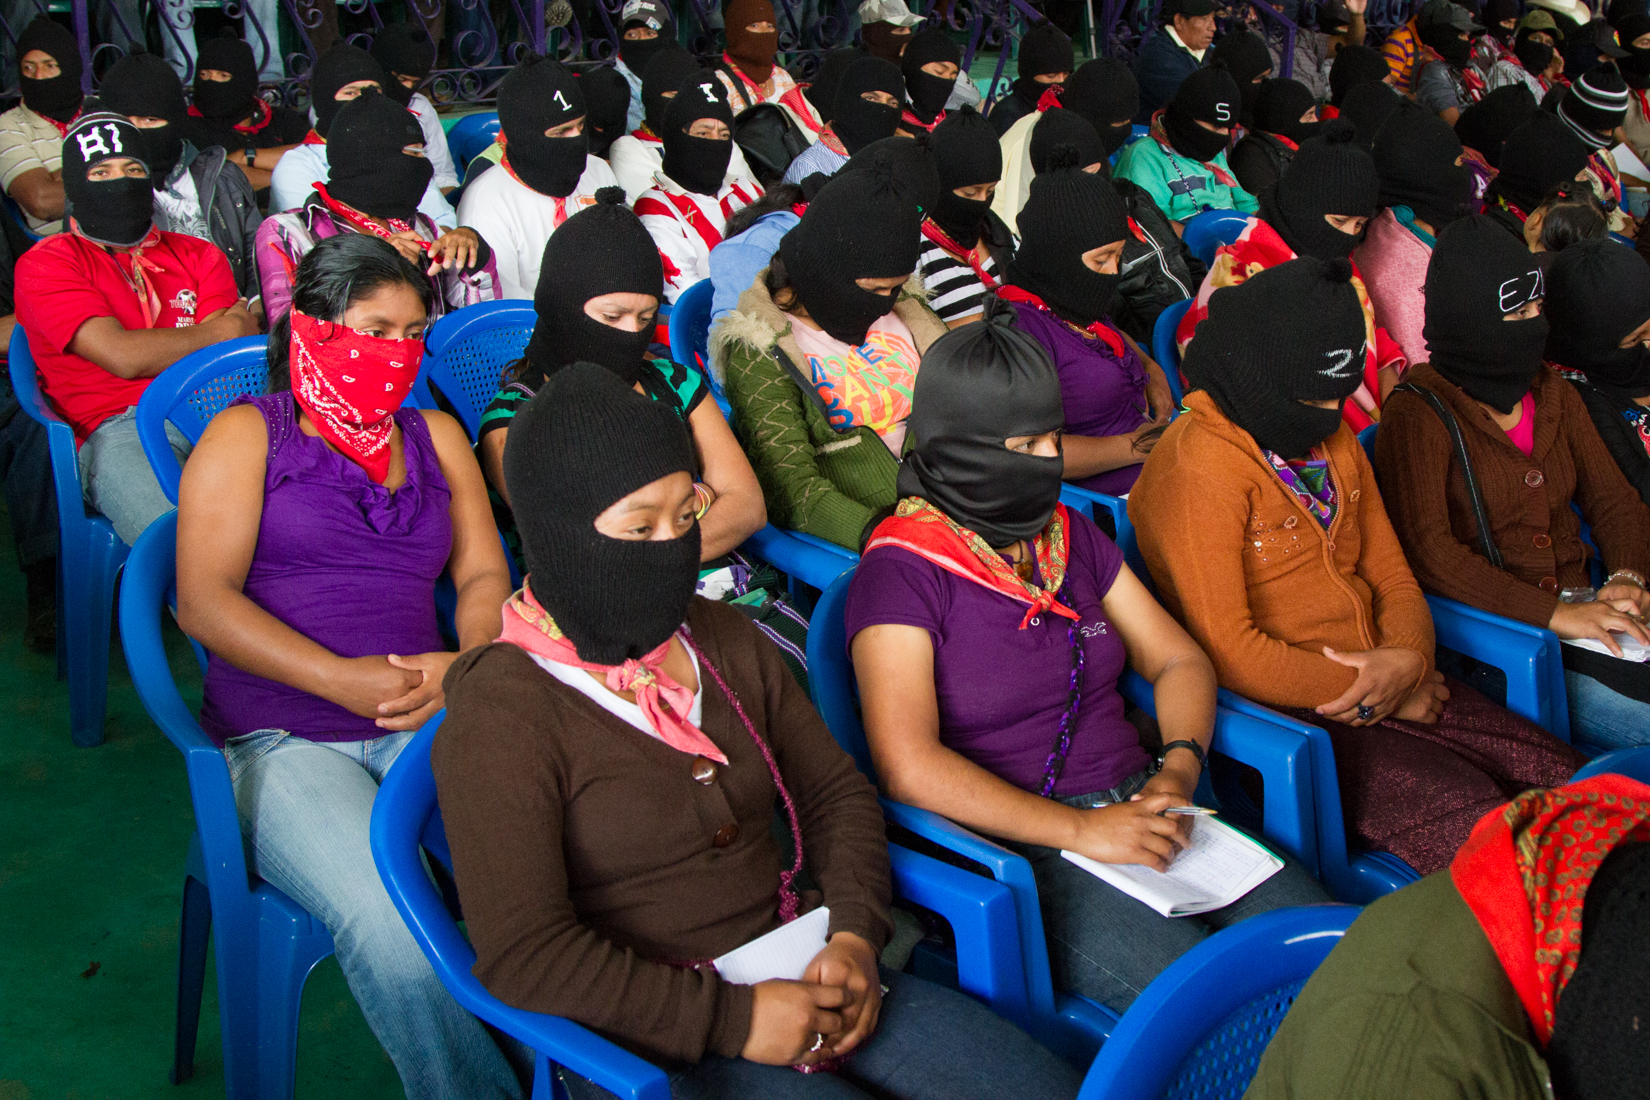 The political significance of Zapatismo